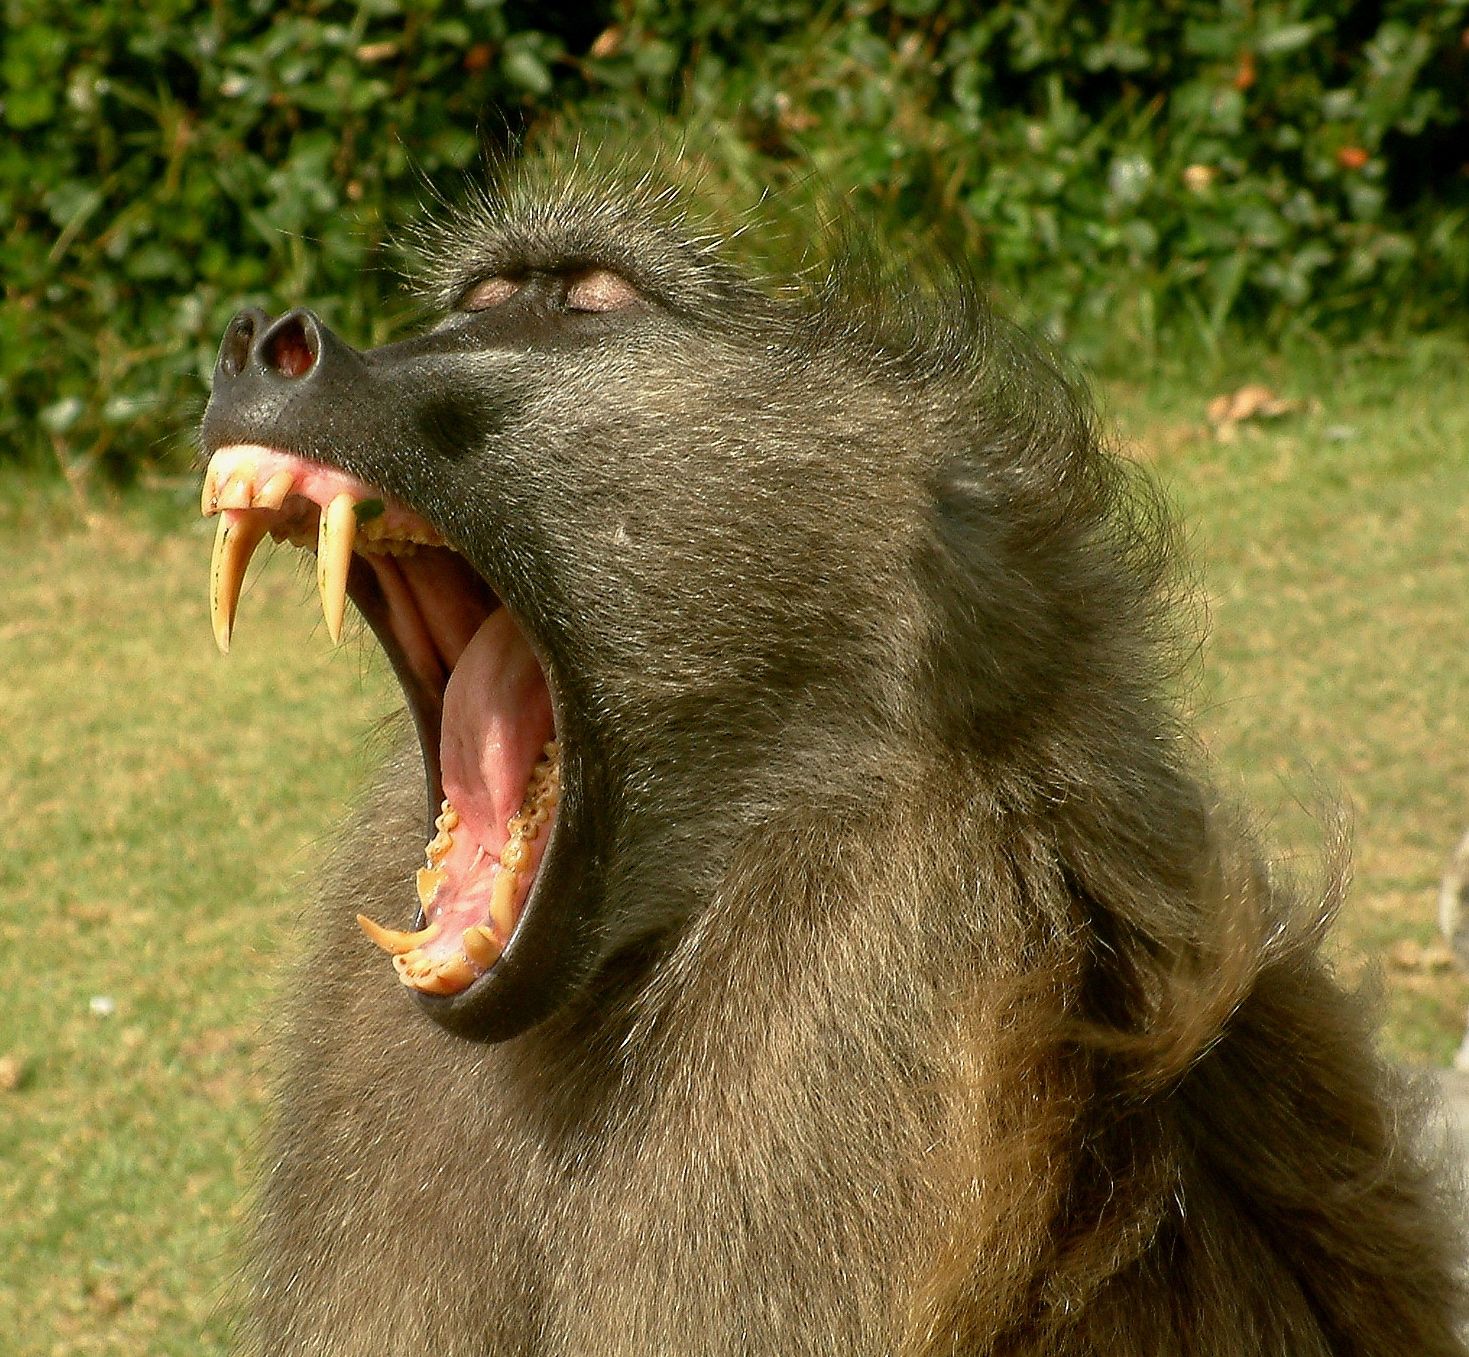 dangerous+baboons+angry+baboons+dangerous+animal+attacks+news+picture.jpg